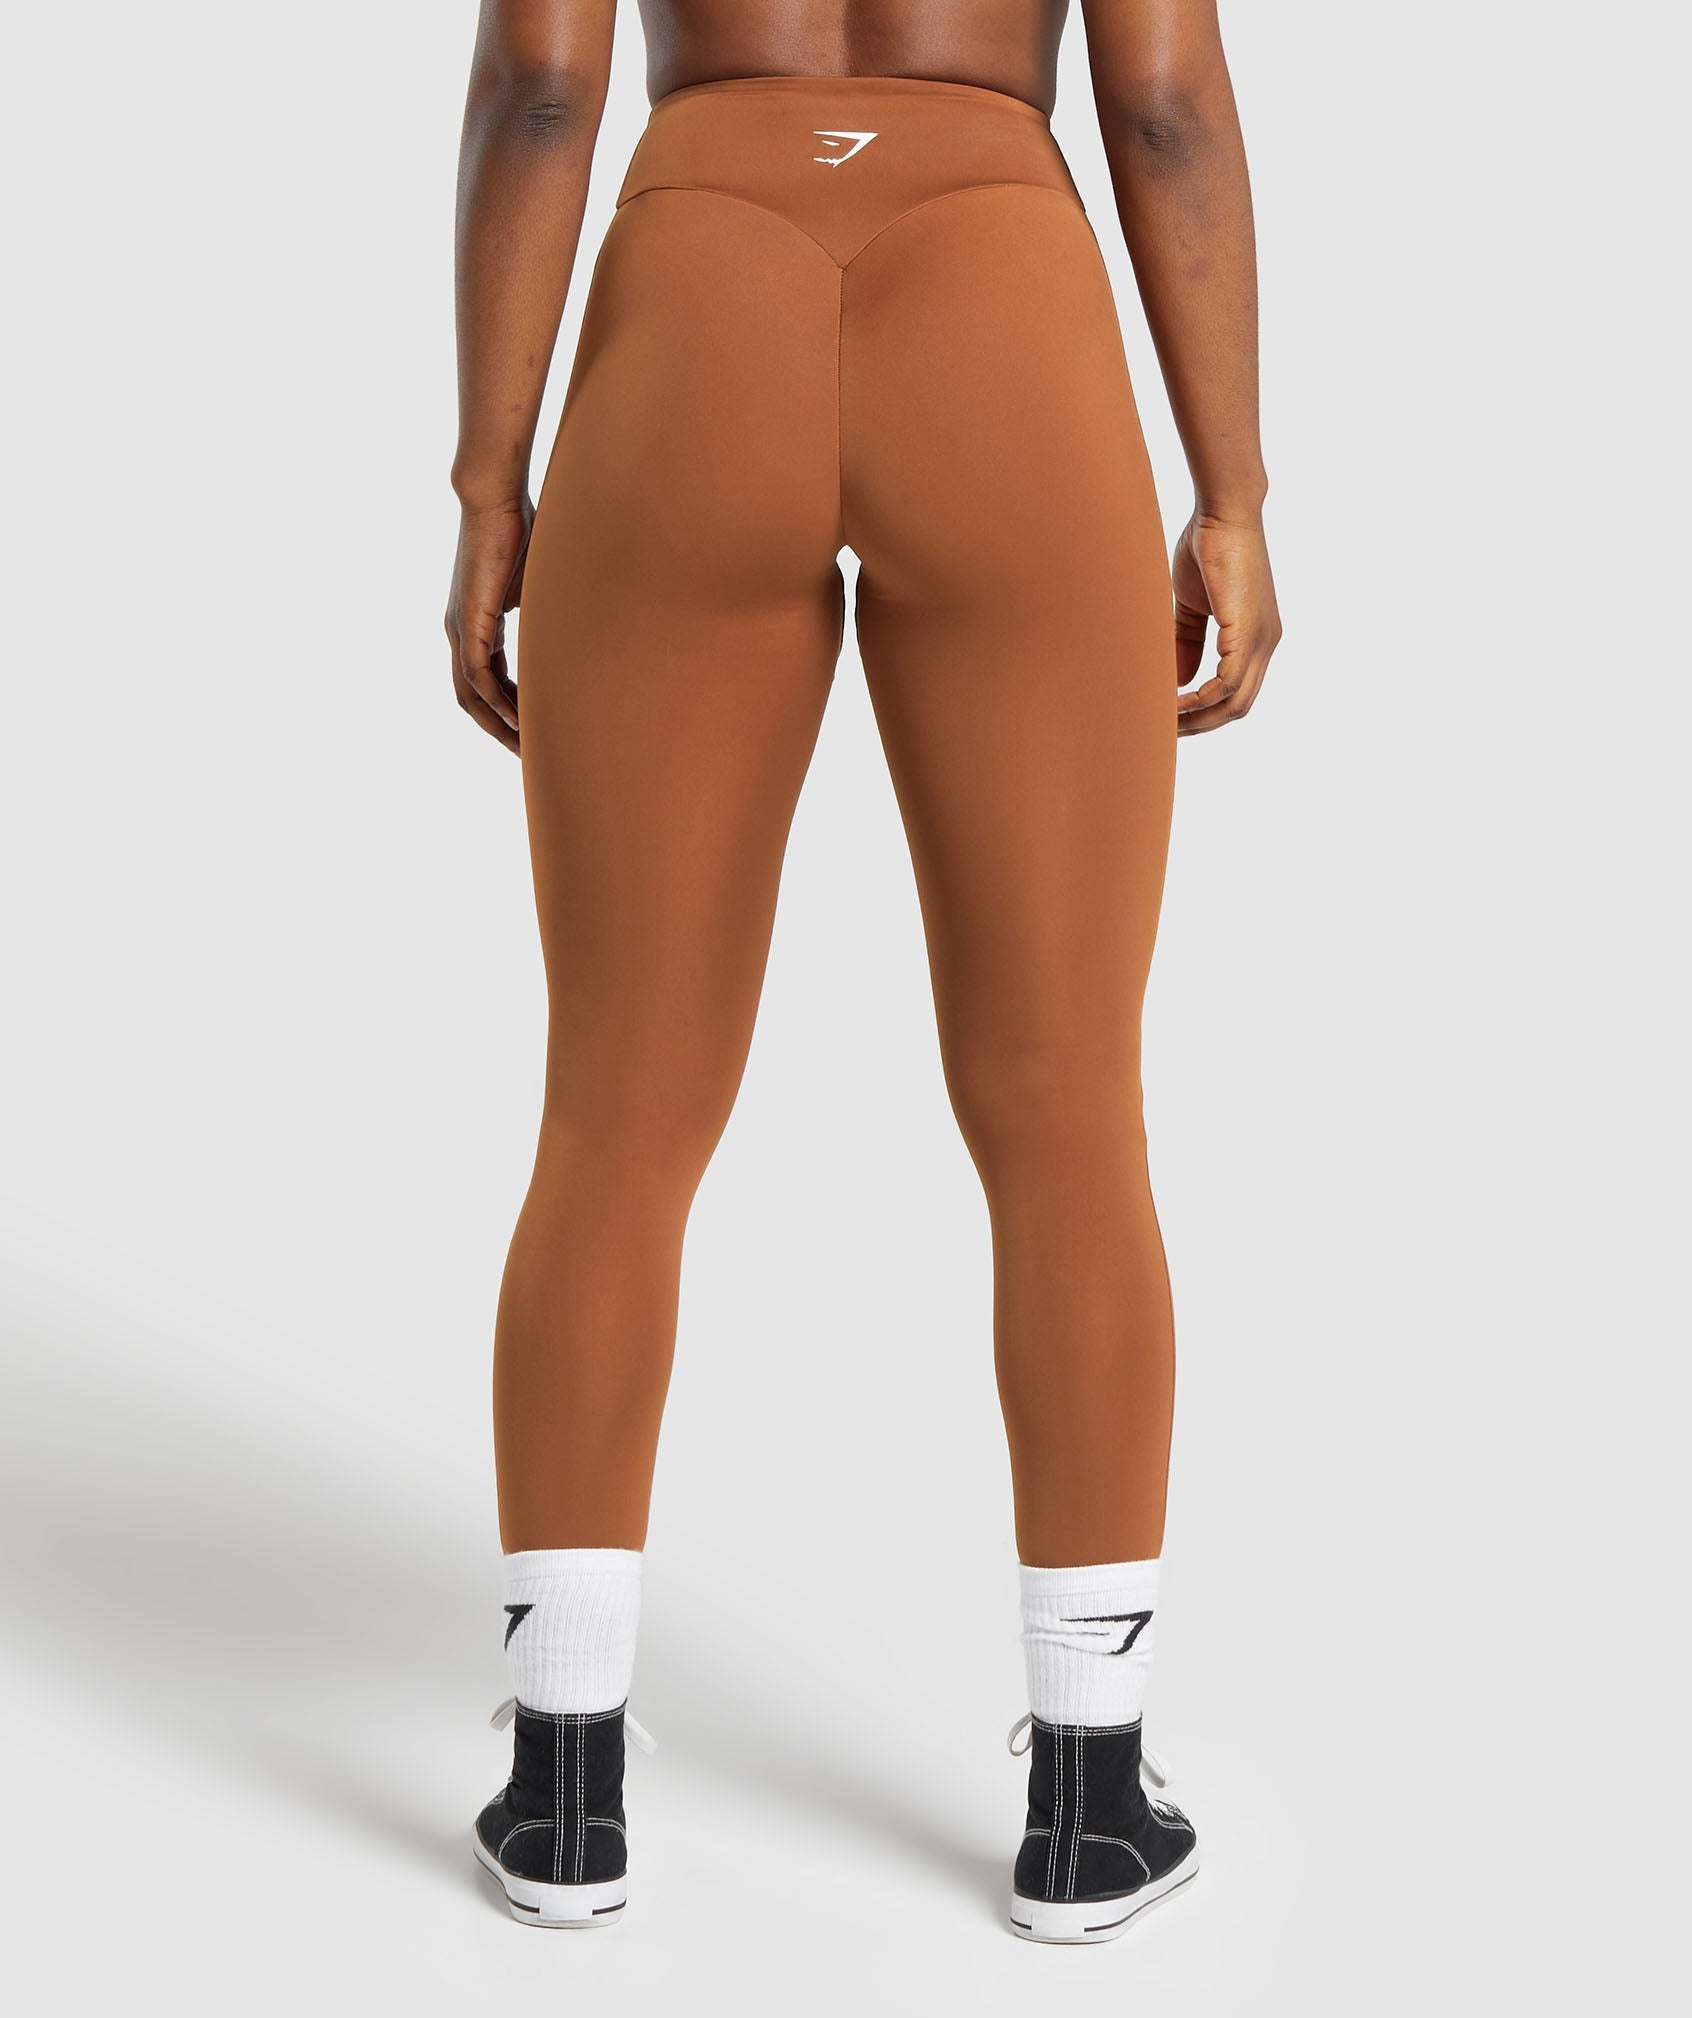 GS Power Tall Leggings in Copper Brown - view 2